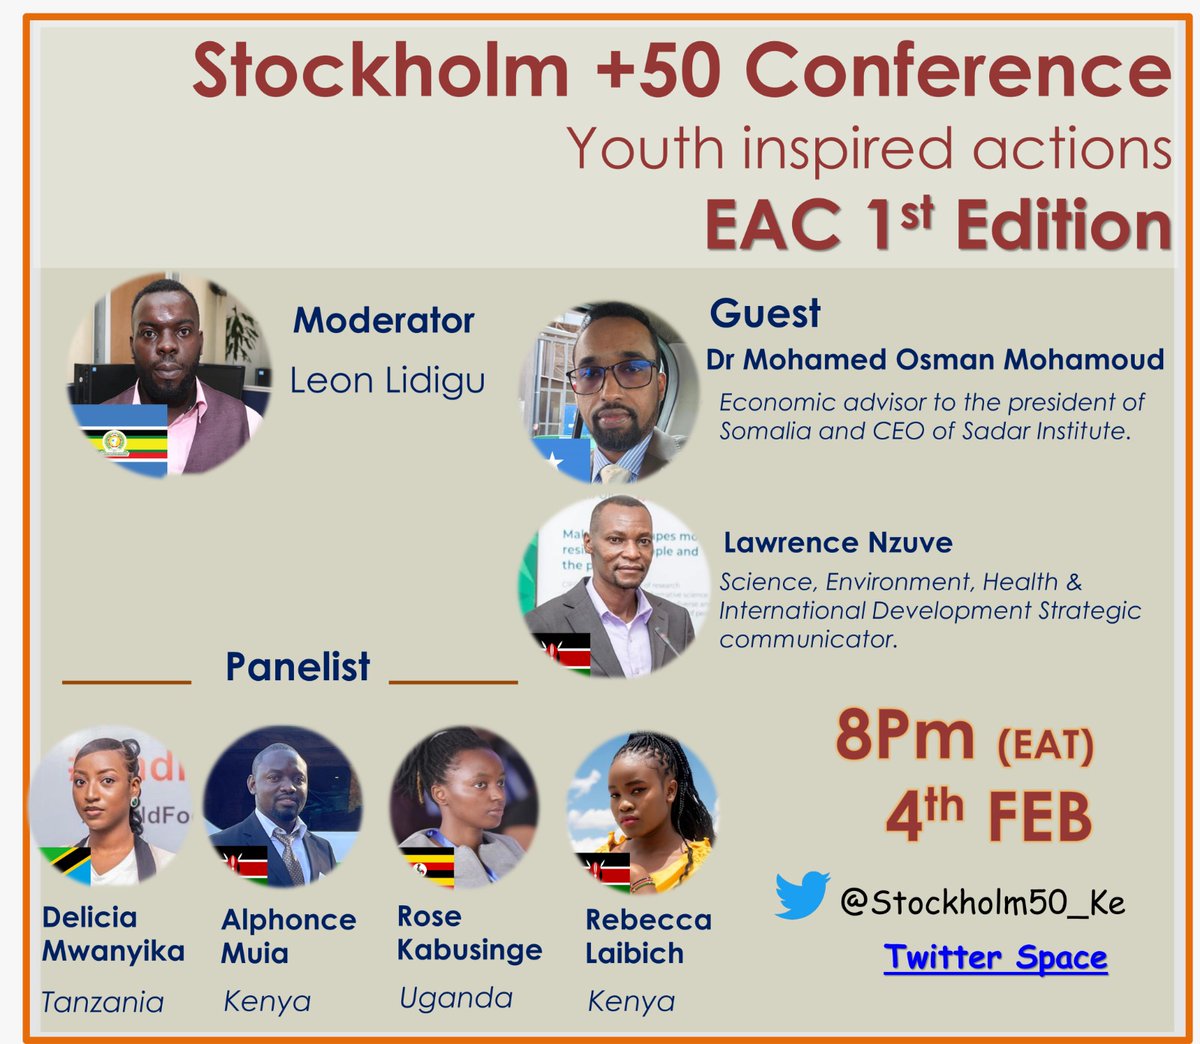 Meet the speakers for the Twitter space conversation tomorrow at 8pm Nairobi time. 
@MohamedOsmanSom @Lawrencenzuve @MuiaAlphonce @DeliciaMwanyika @RLaibich @KobusingeRose1
The session will be moderated by @LeonLidigu
Under the theme:Youth Inspired Actions in EAC
#ThePowerInYOUth